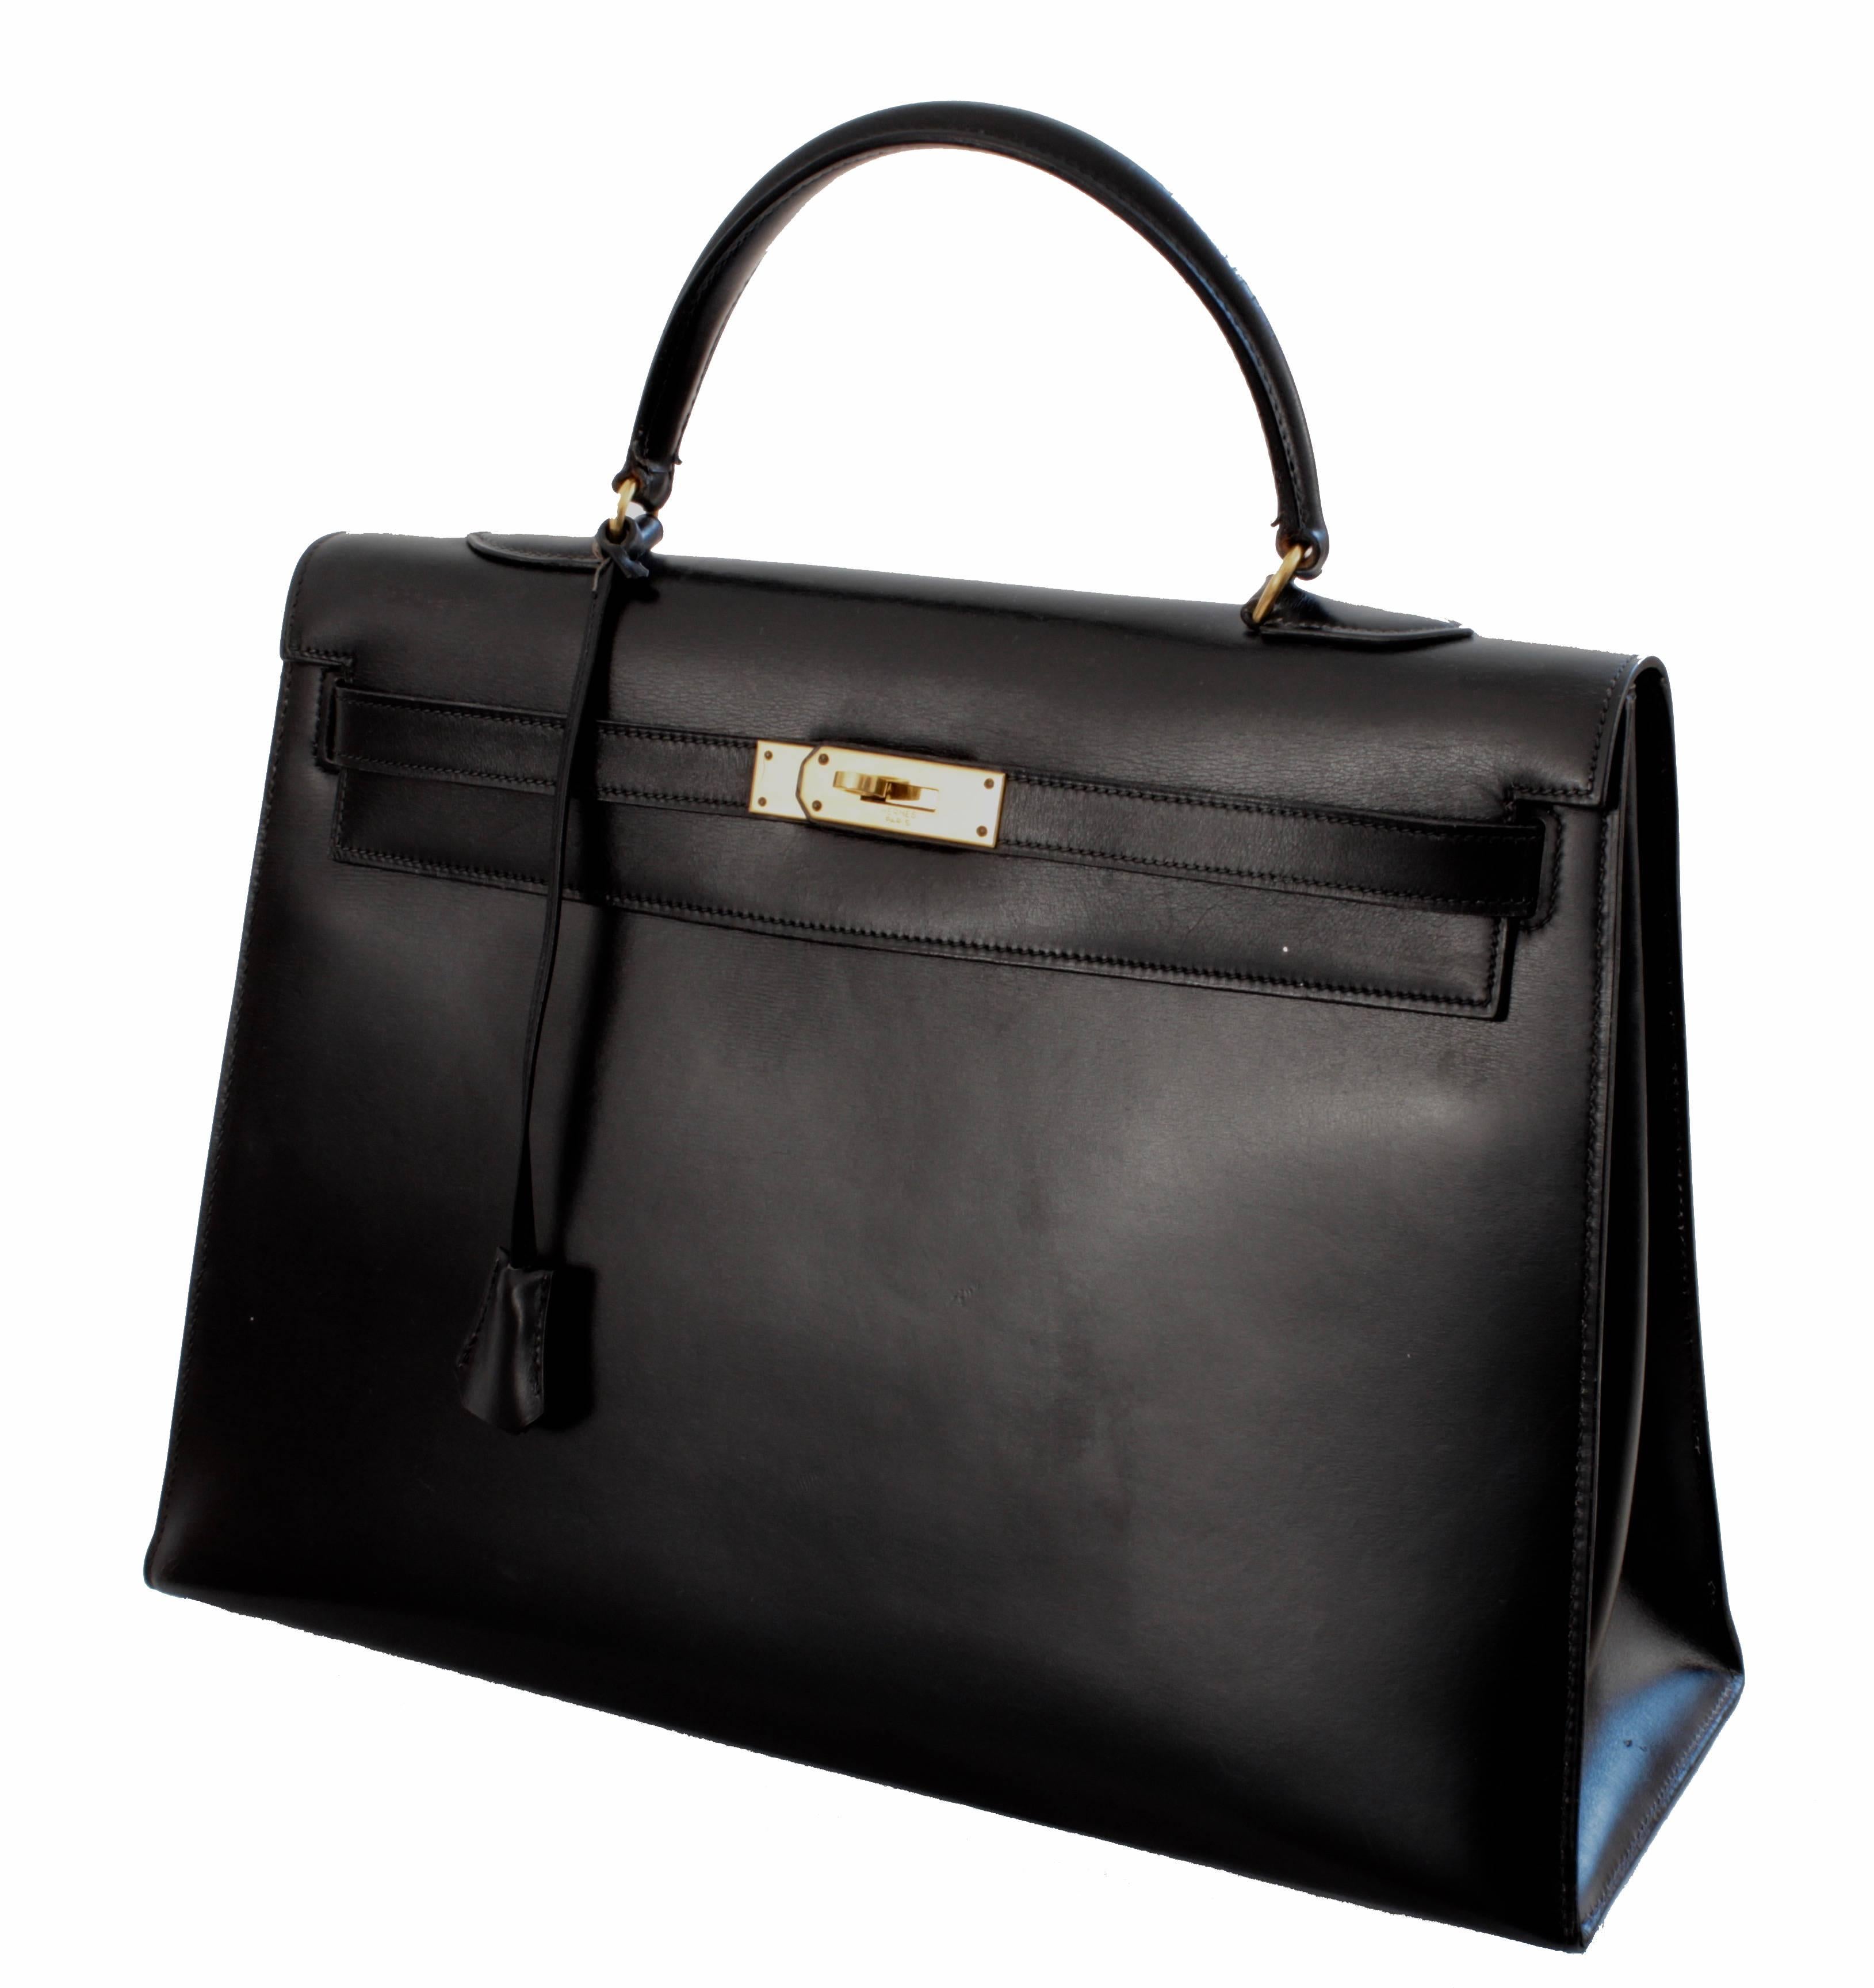 This fabulous Kelly bag was made by Hermes Paris in 1974.  Made from their signature box leather in Noir or black, this large 35cm bag features gold hardware and is fully-lined in black goatskin leather.  Stamped D in a circle, which indicates a